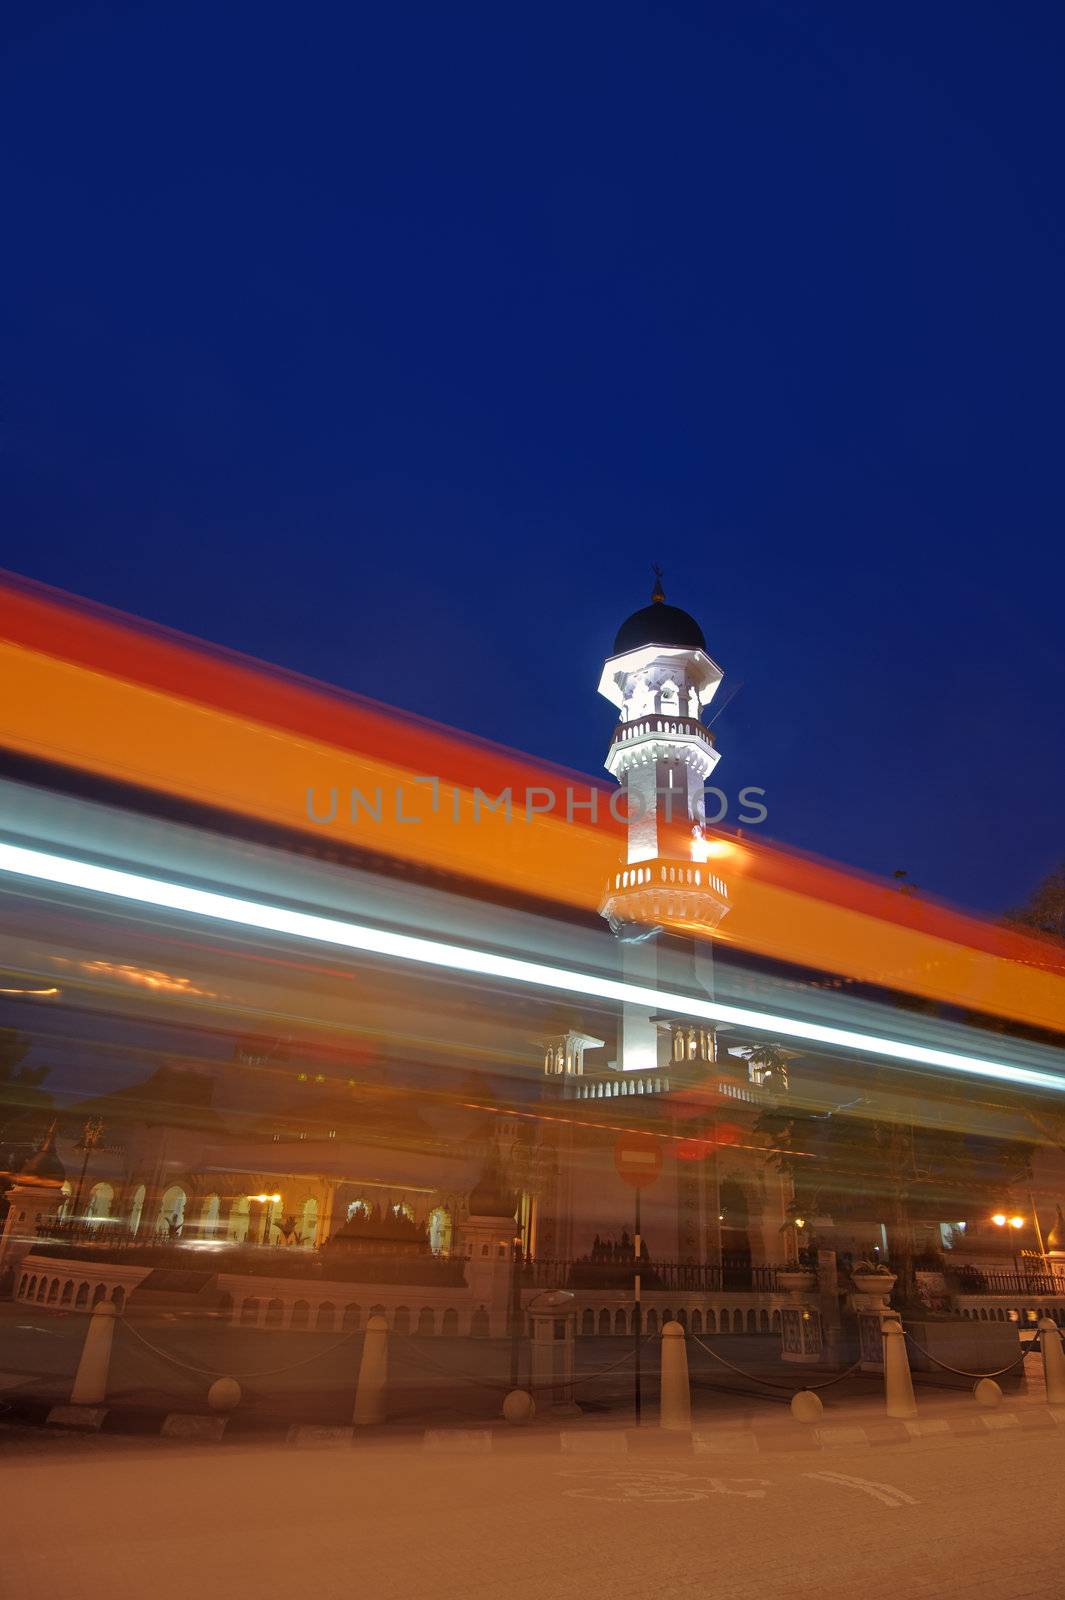 Colorful city night with famous landmark and fast moving car lighting, Malaysia, Asia.